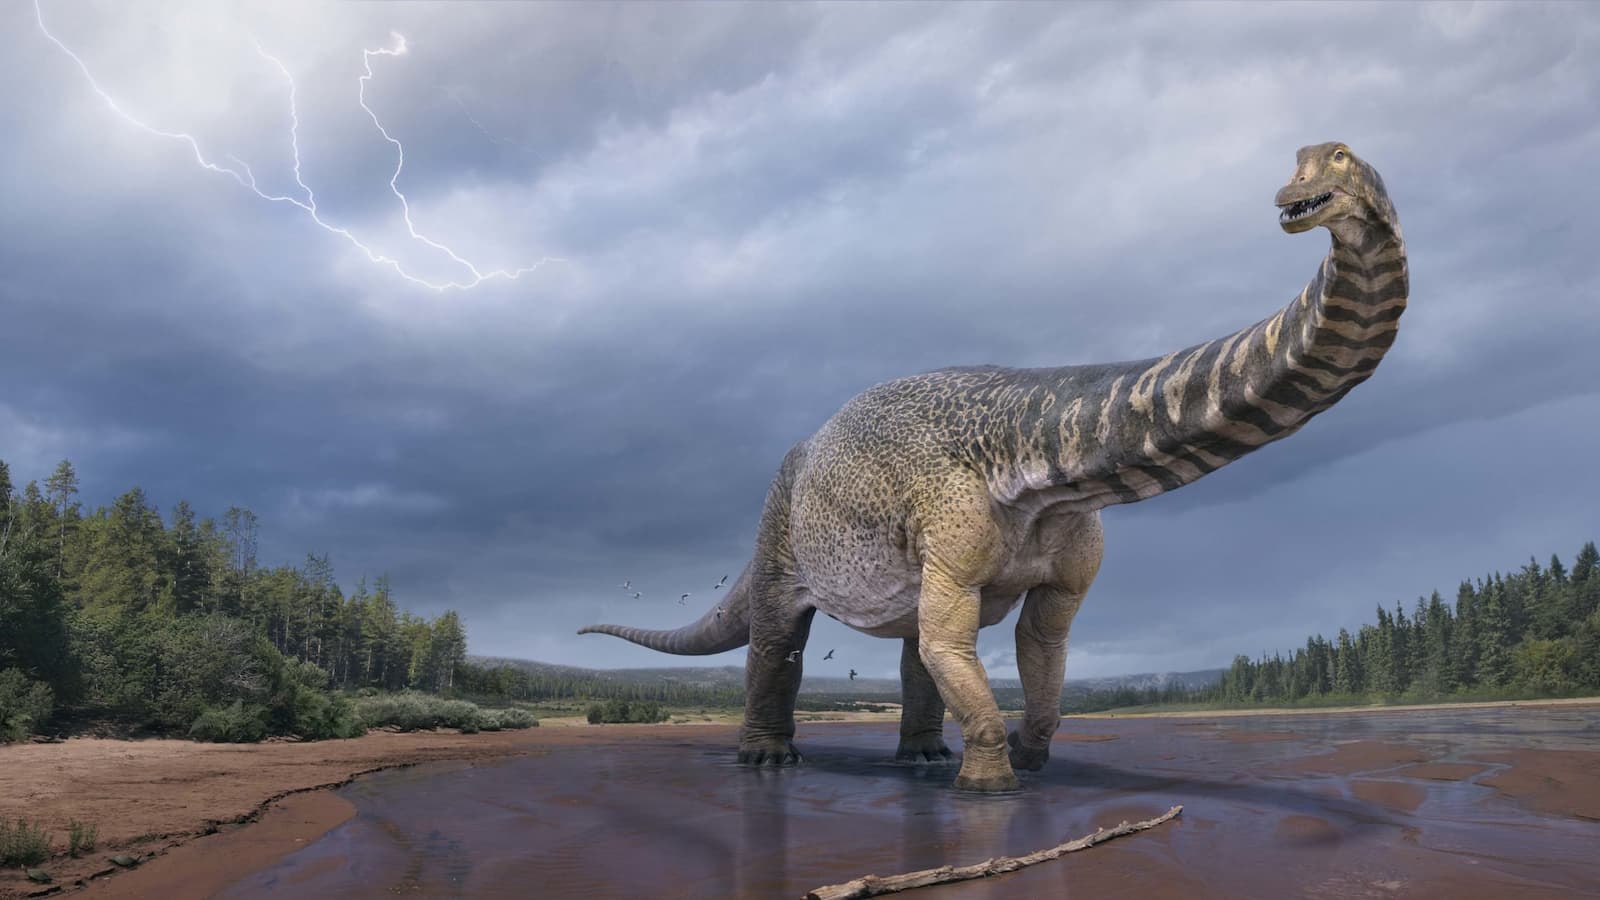 Unveiling the Largest Dinosaur Ever - Prepare to be Amazed by Its Enormous Size